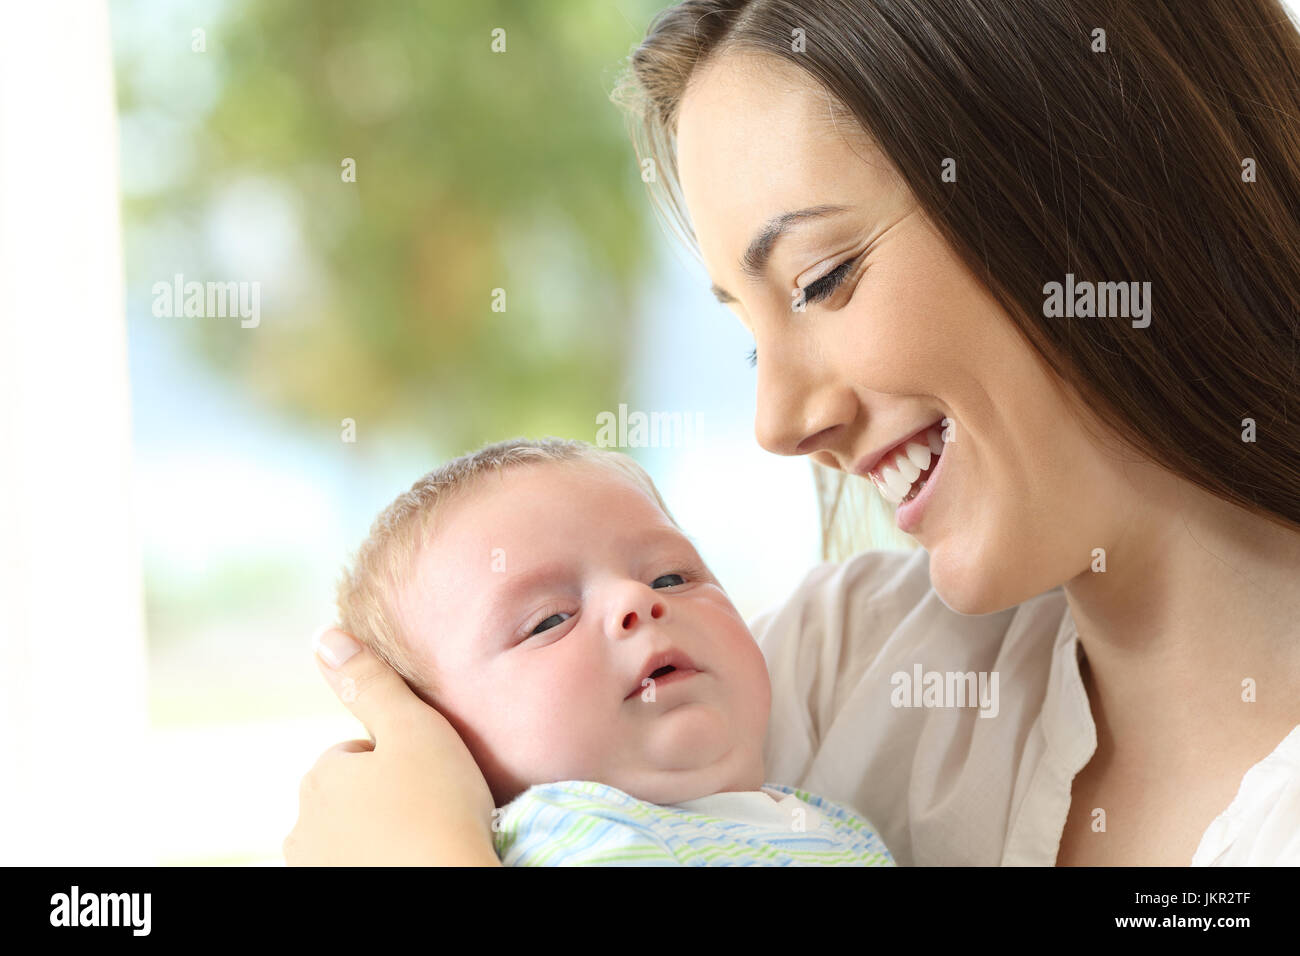 Portrait of a proud mother holding her baby and looking at him Stock Photo